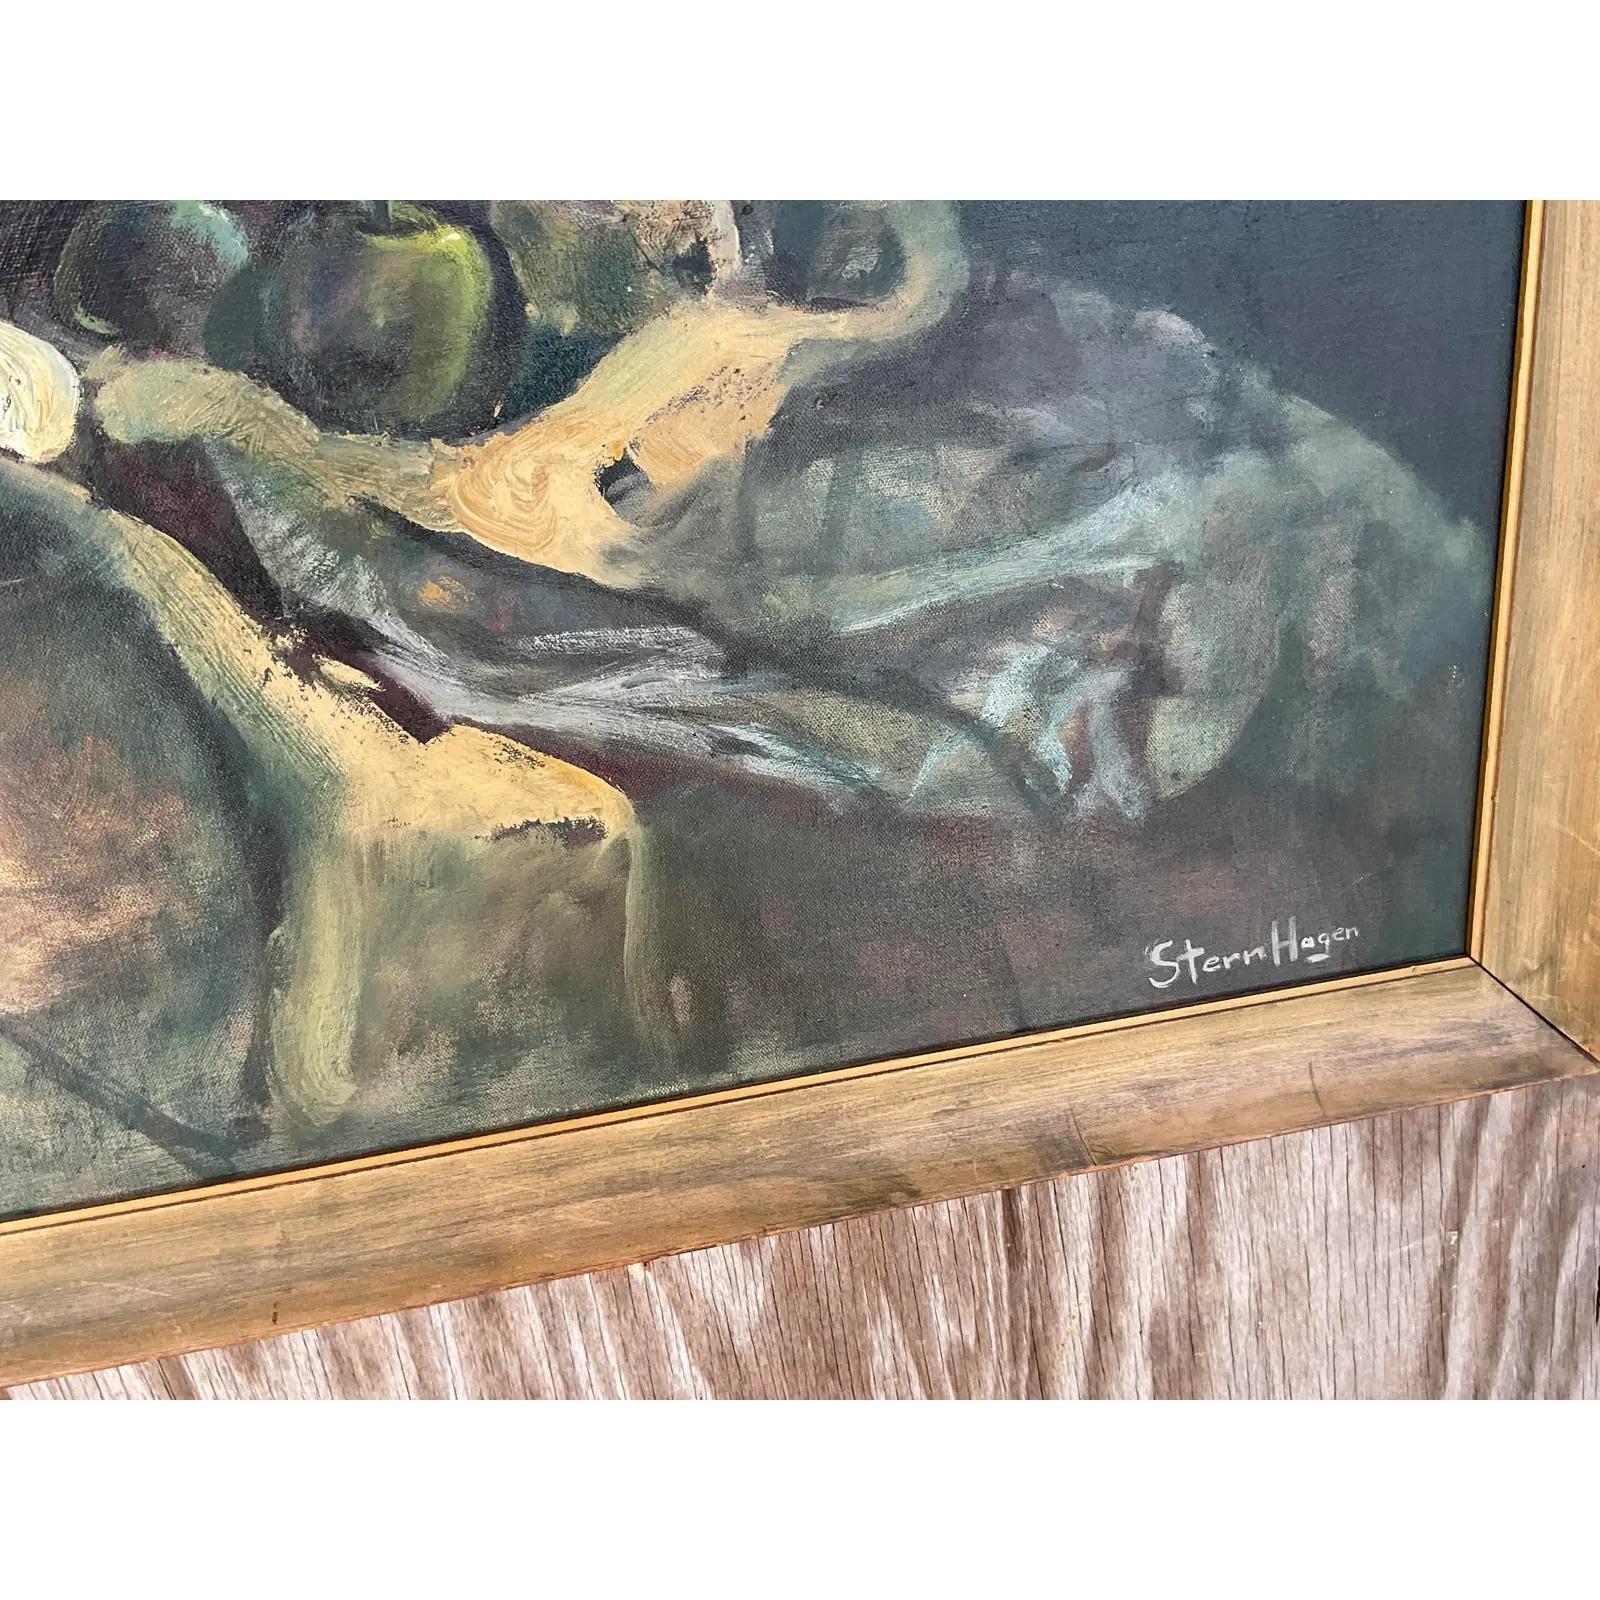 Fantastic vintage original oil painting. A moody still life in a beautiful painterly style. Signed by the artist SternHagen. Acquired from a Palm Beach estate.